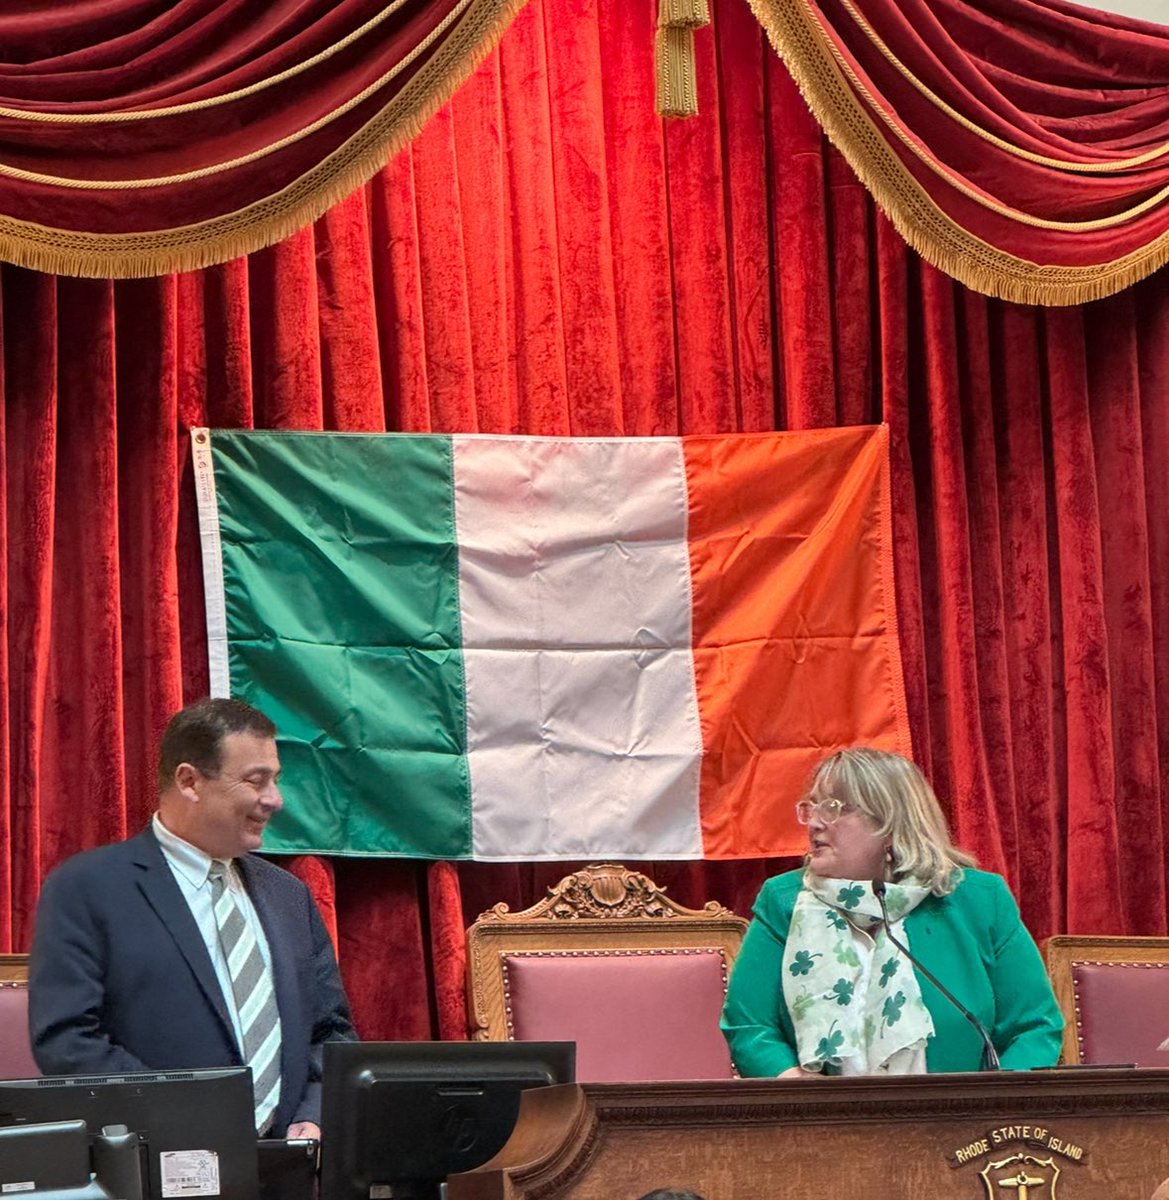 Cheers to Chairwoman @Kathy35SK for reminding us that immigrants from everywhere continue to make our country better. Can’t think of a better way to celebrate St. Patrick’s Day at the @RIHouseofReps